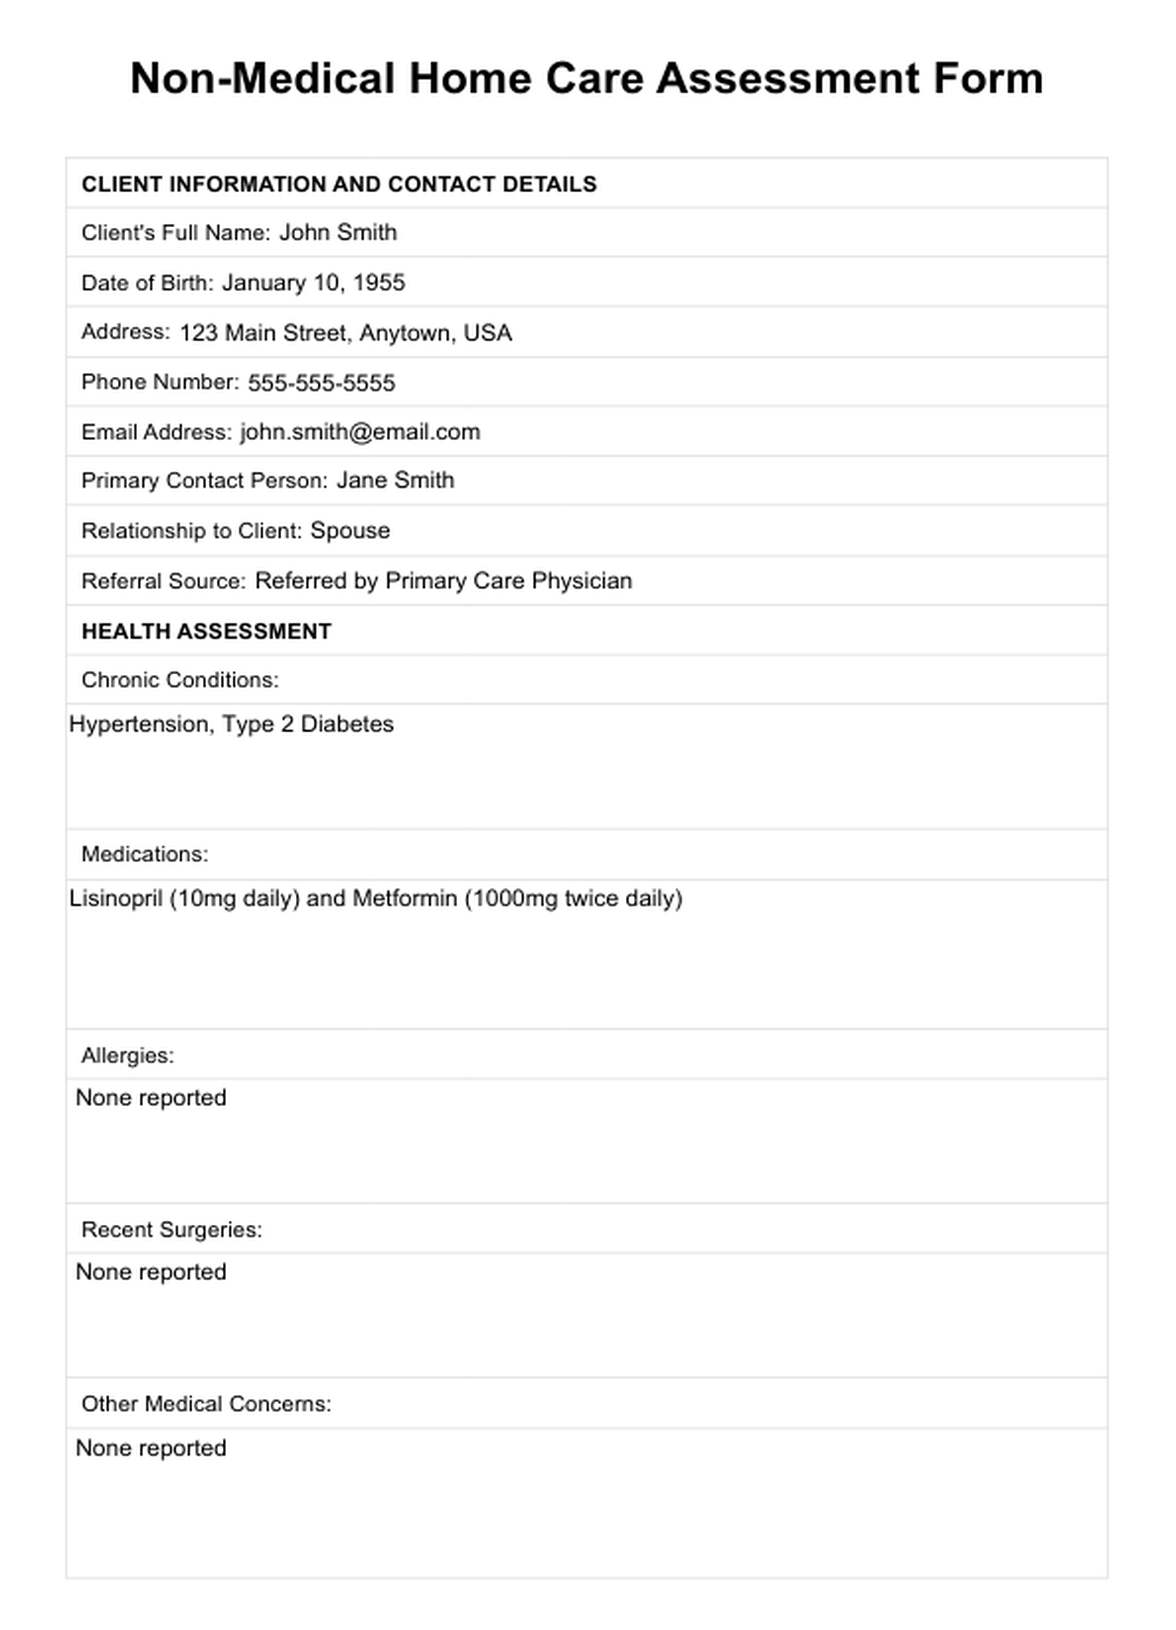 Non-Medical Home Care Assessment Form PDF PDF Example